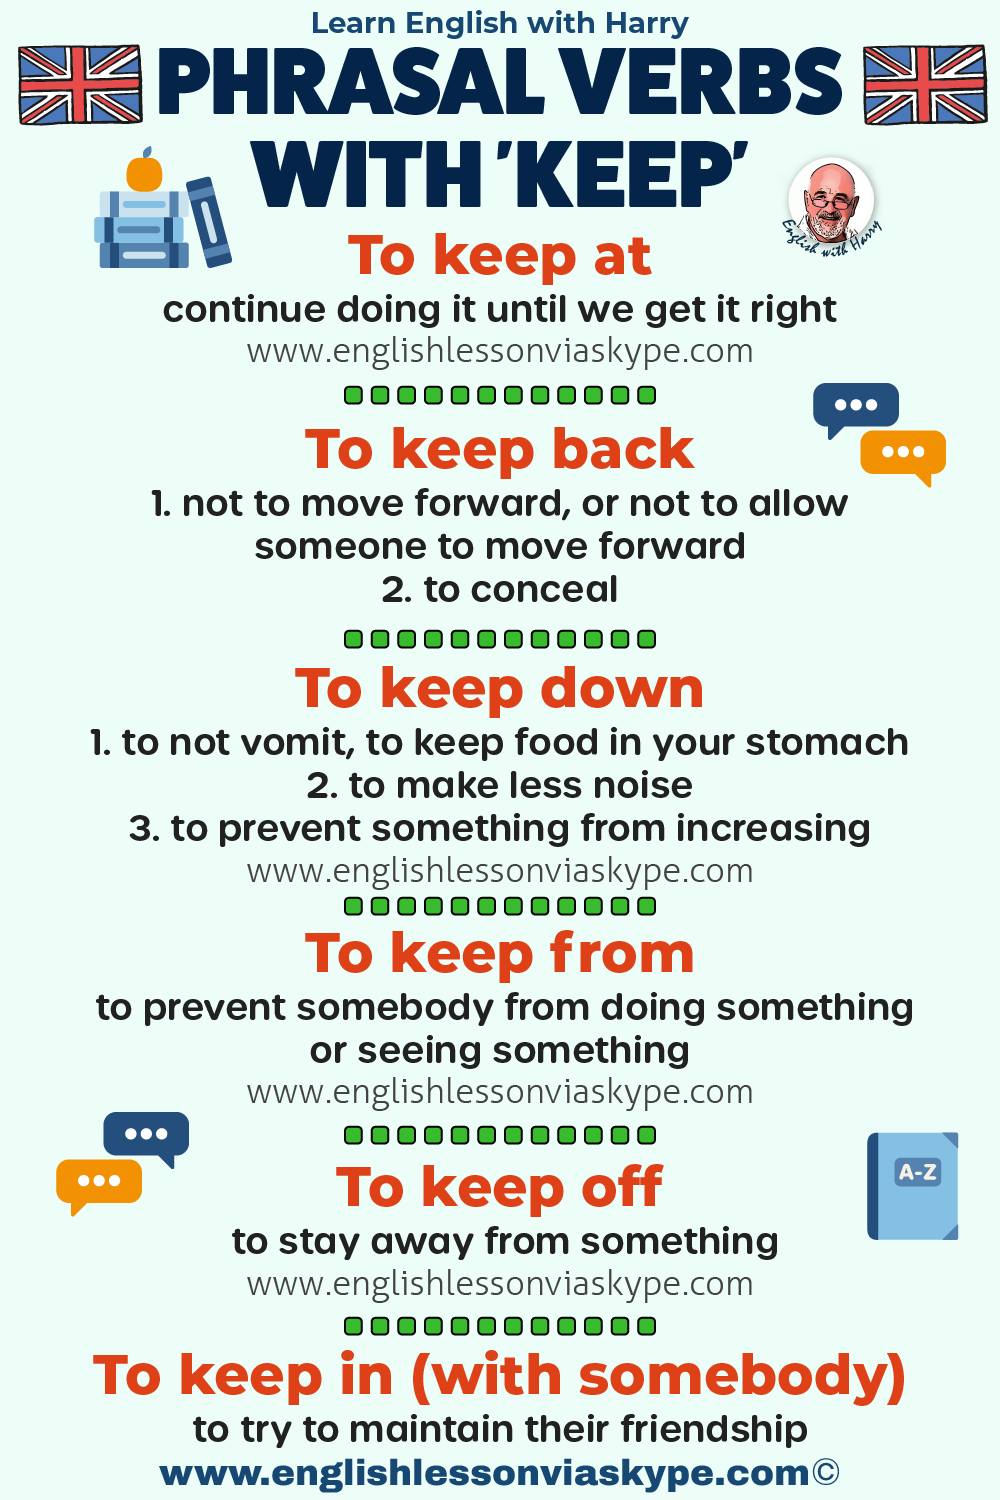 Phrasal verbs with keep. Advanced English learning. Online English lessons on Zoom at www.englishlessonviaskype.com #learnenglish